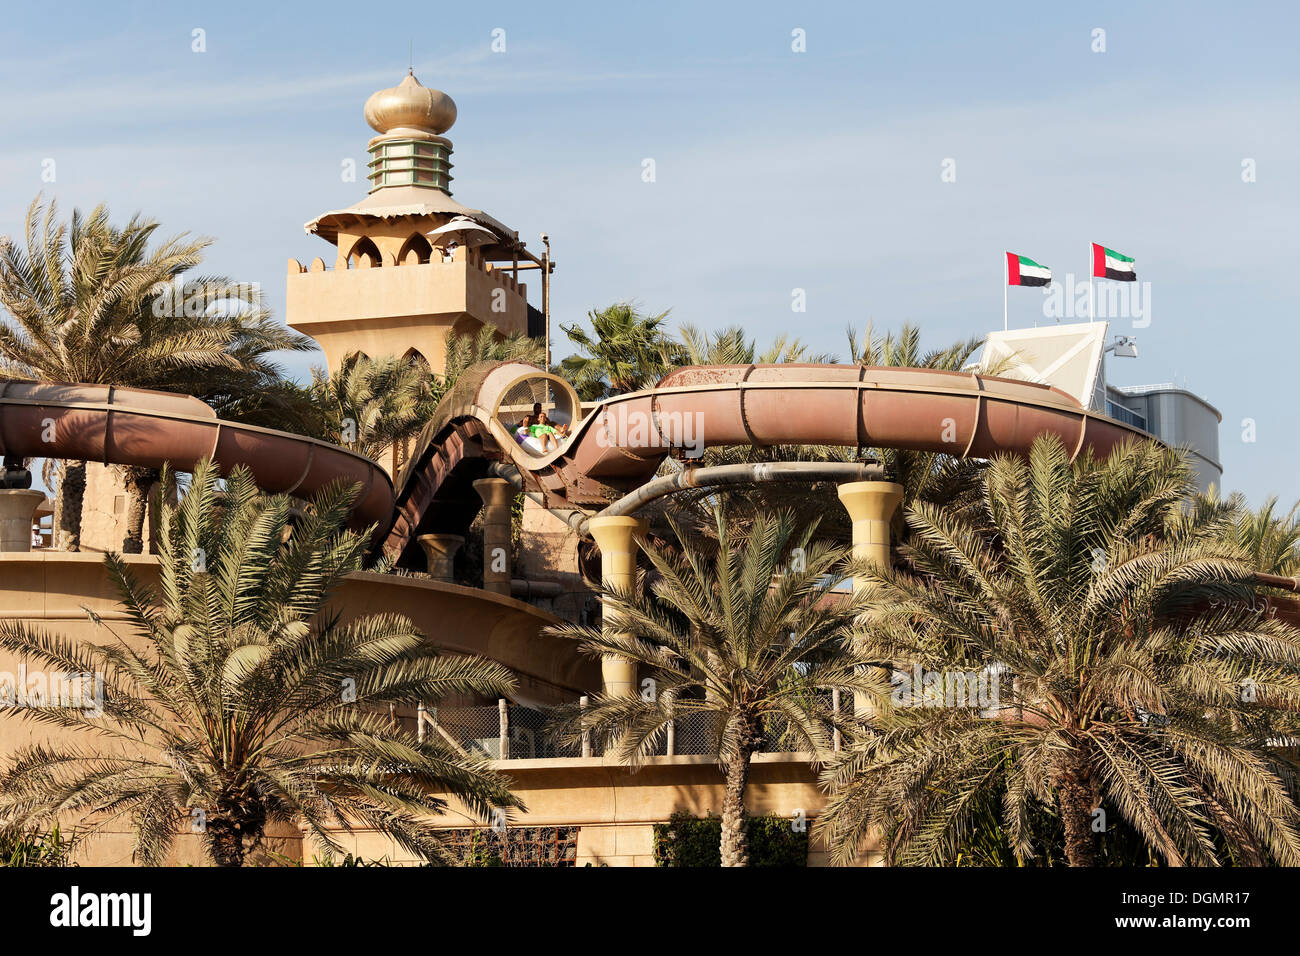 Wild Wadi Water Park, water park with water slides, Jumeirah, Dubai, United Arab Emirates, Middle East, Asia Stock Photo